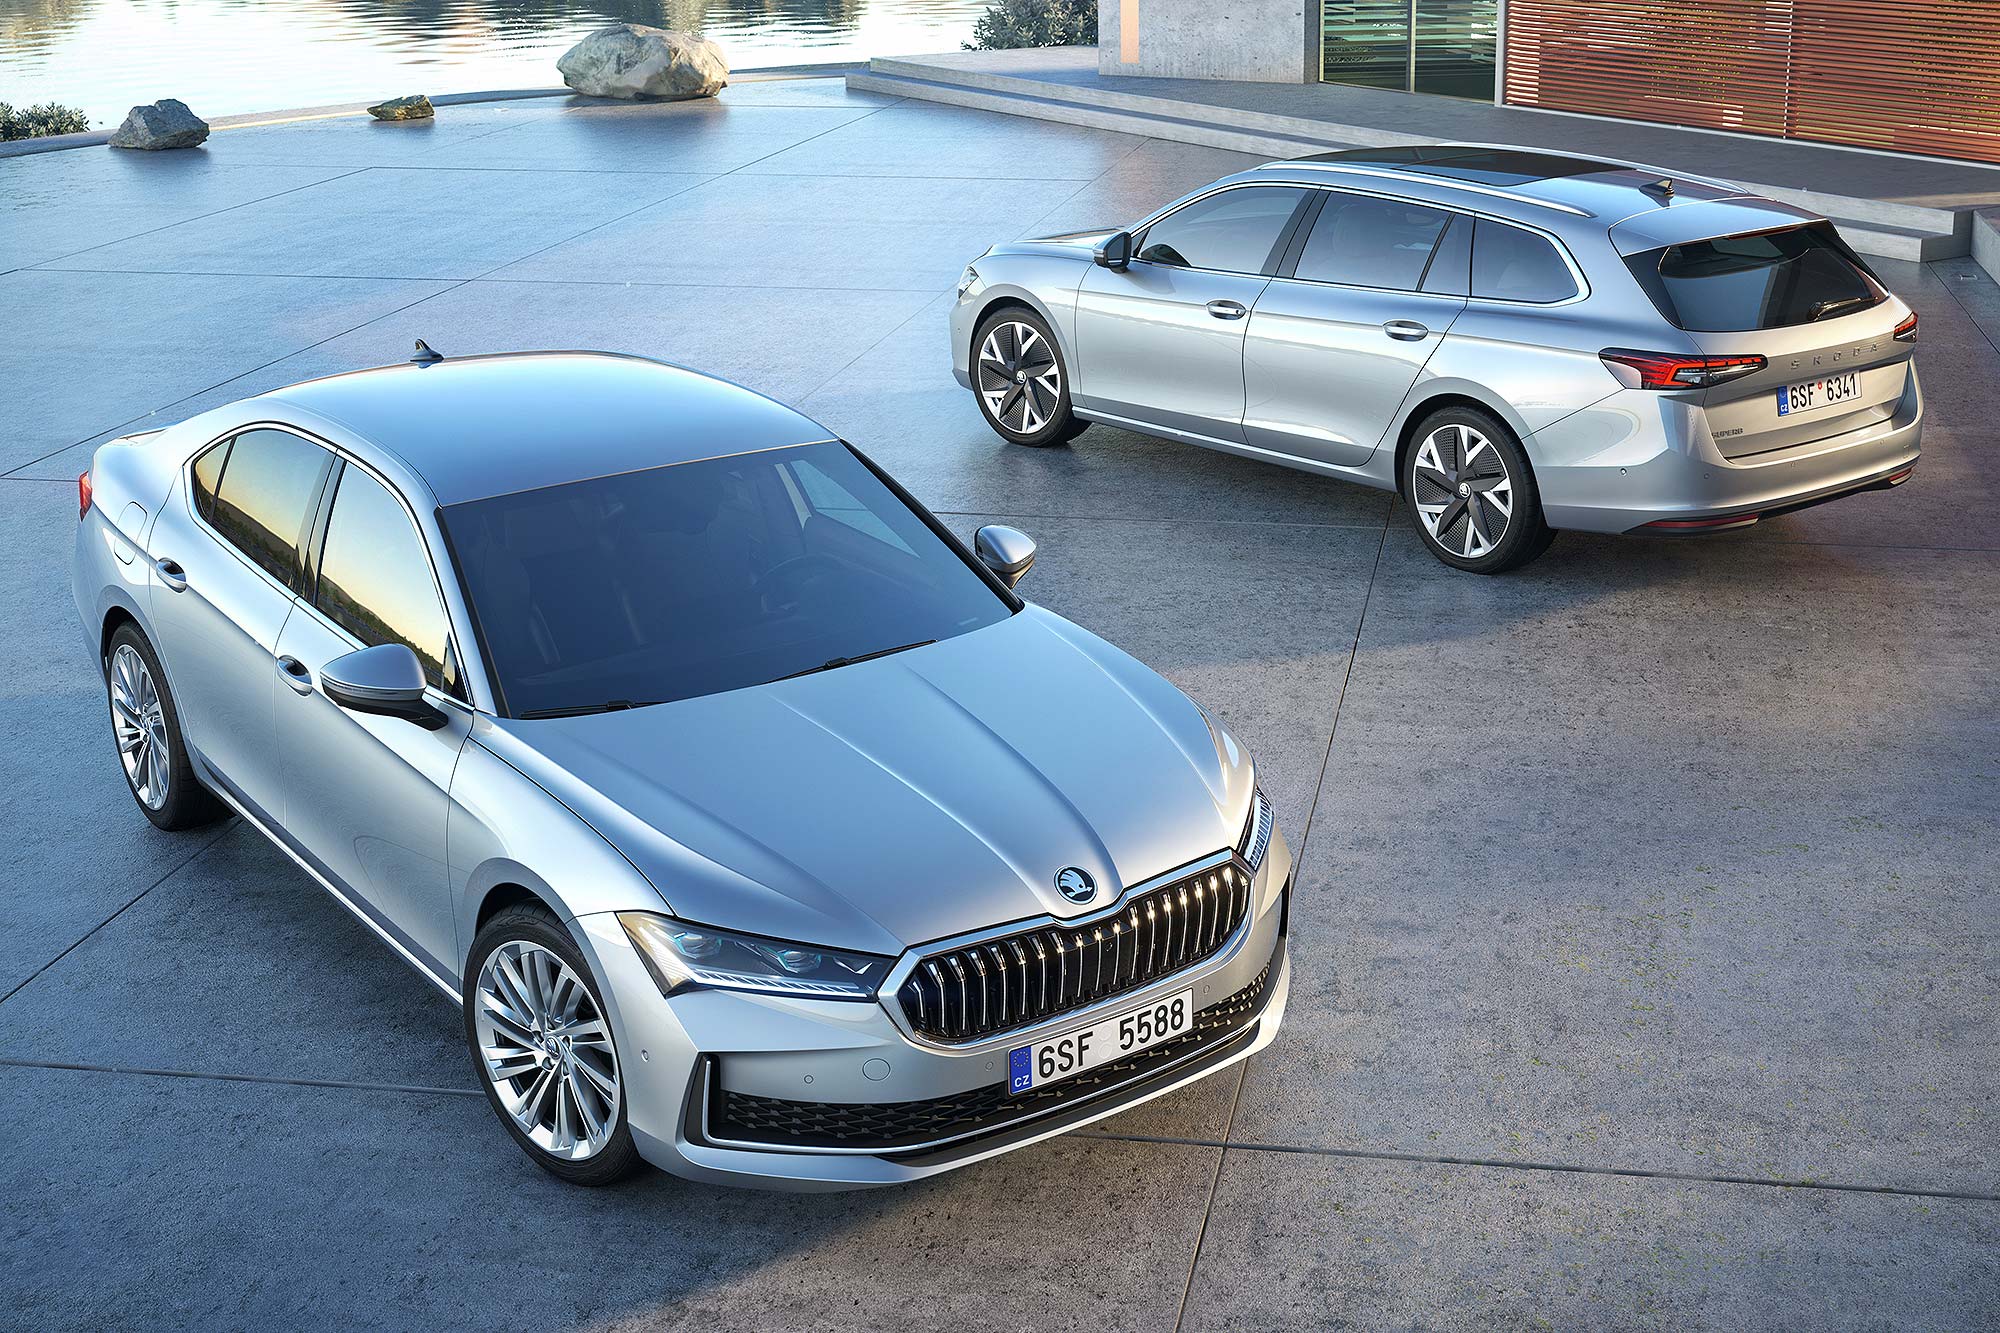 2024 Skoda Superb Specs Revealed: Larger And With Up To 261 Horsepower